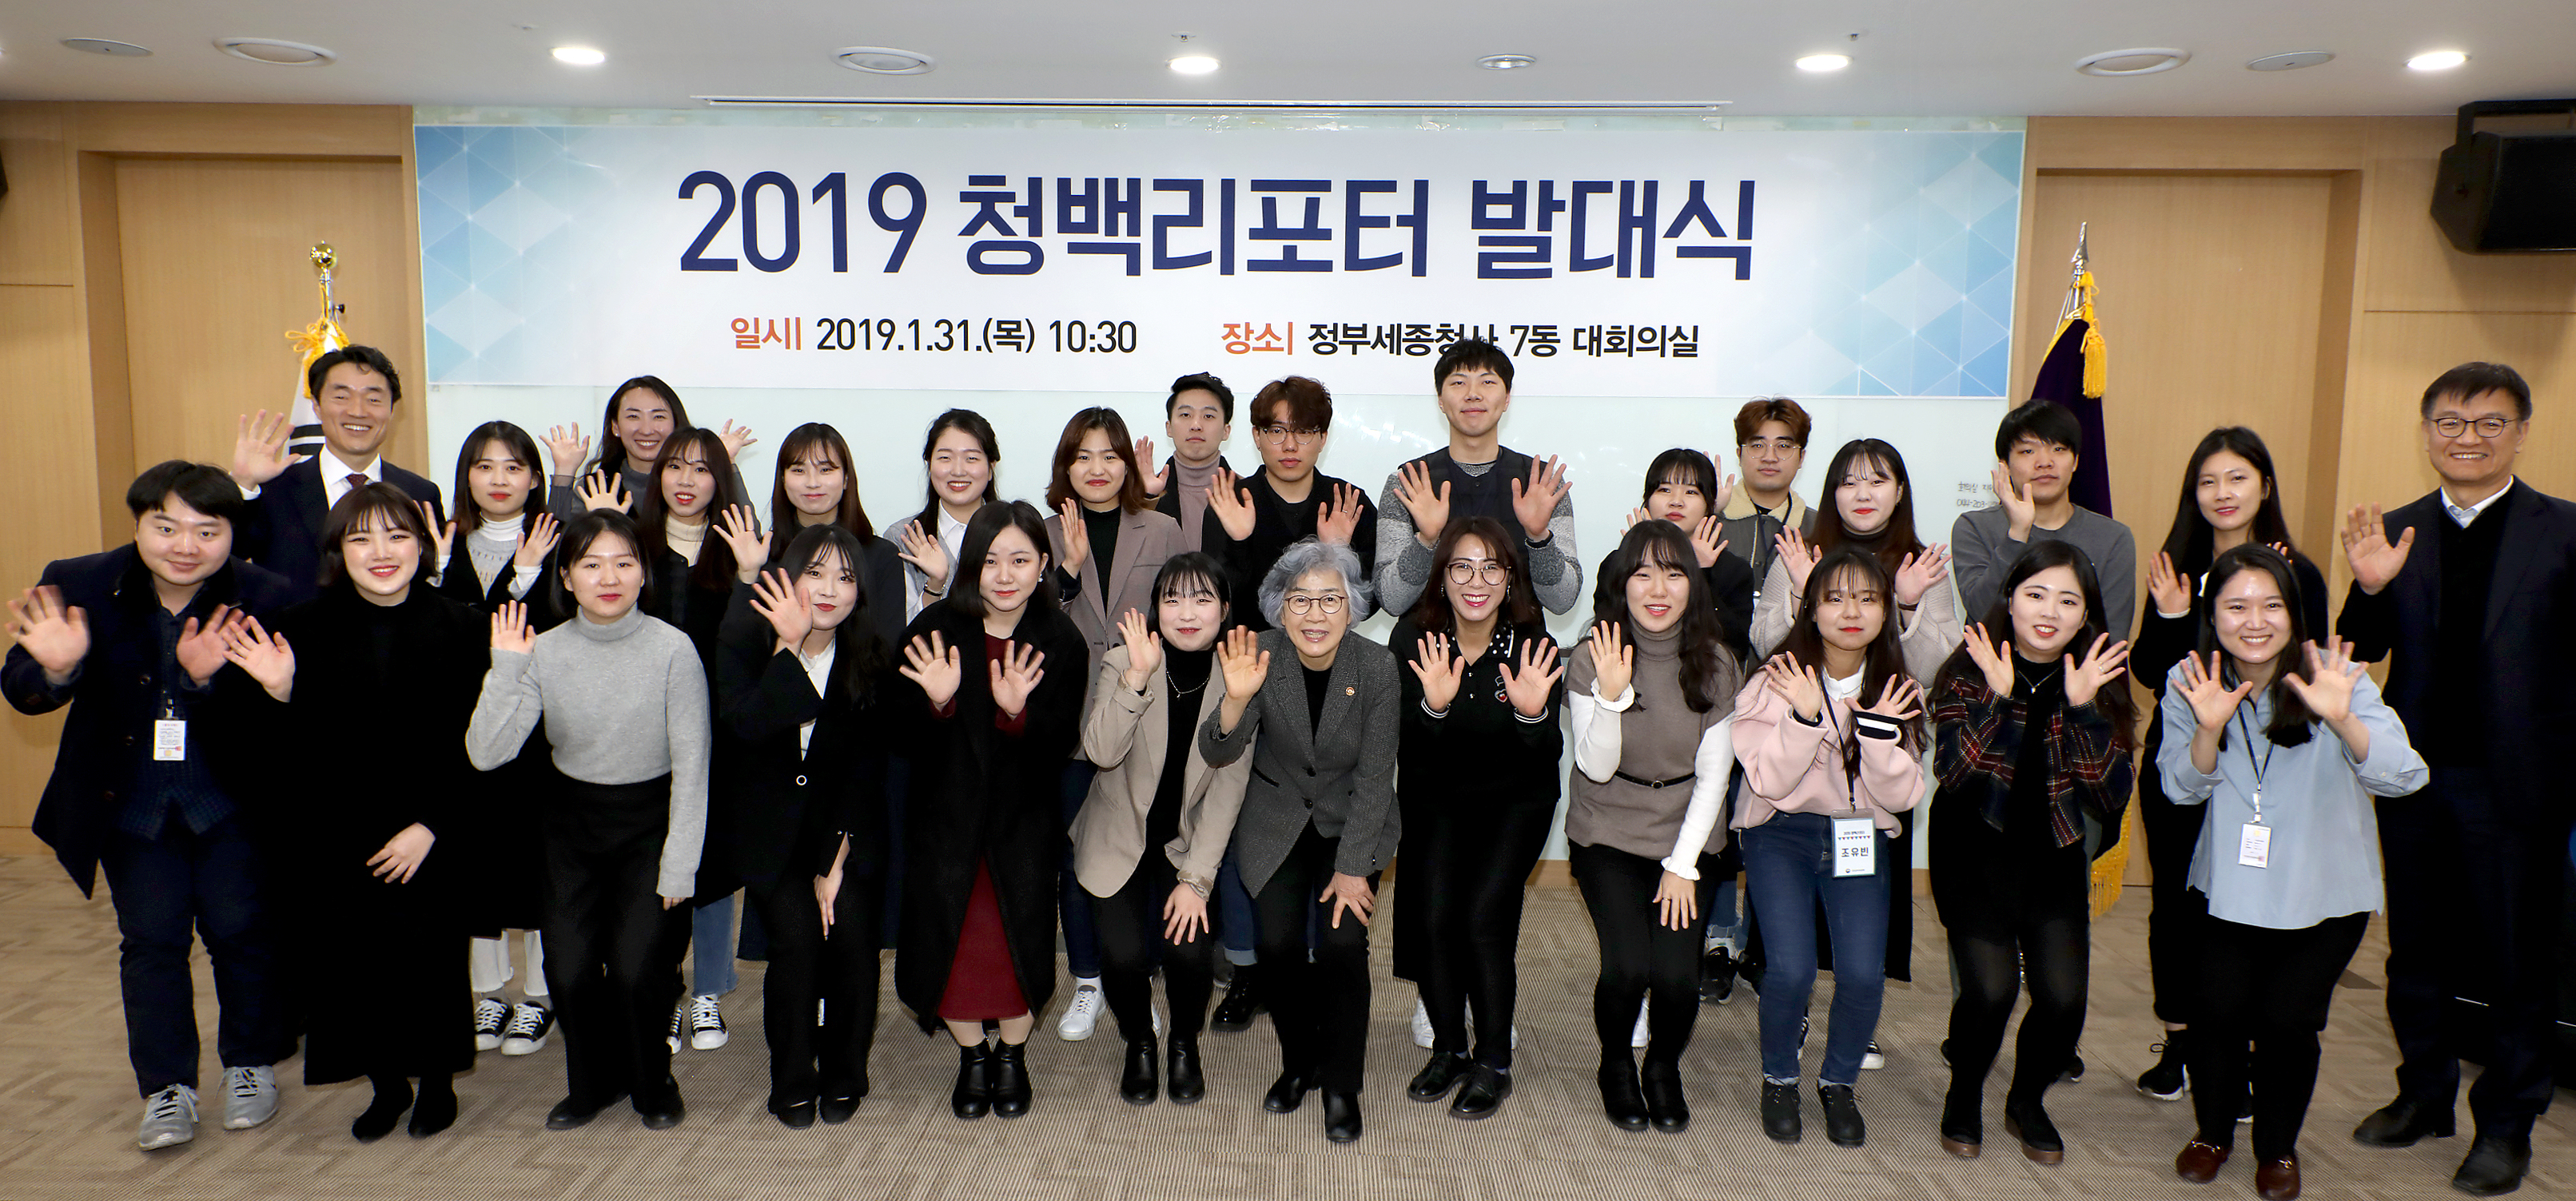 ACRC launched 2019 Cheong-baek Reporter Ceremony